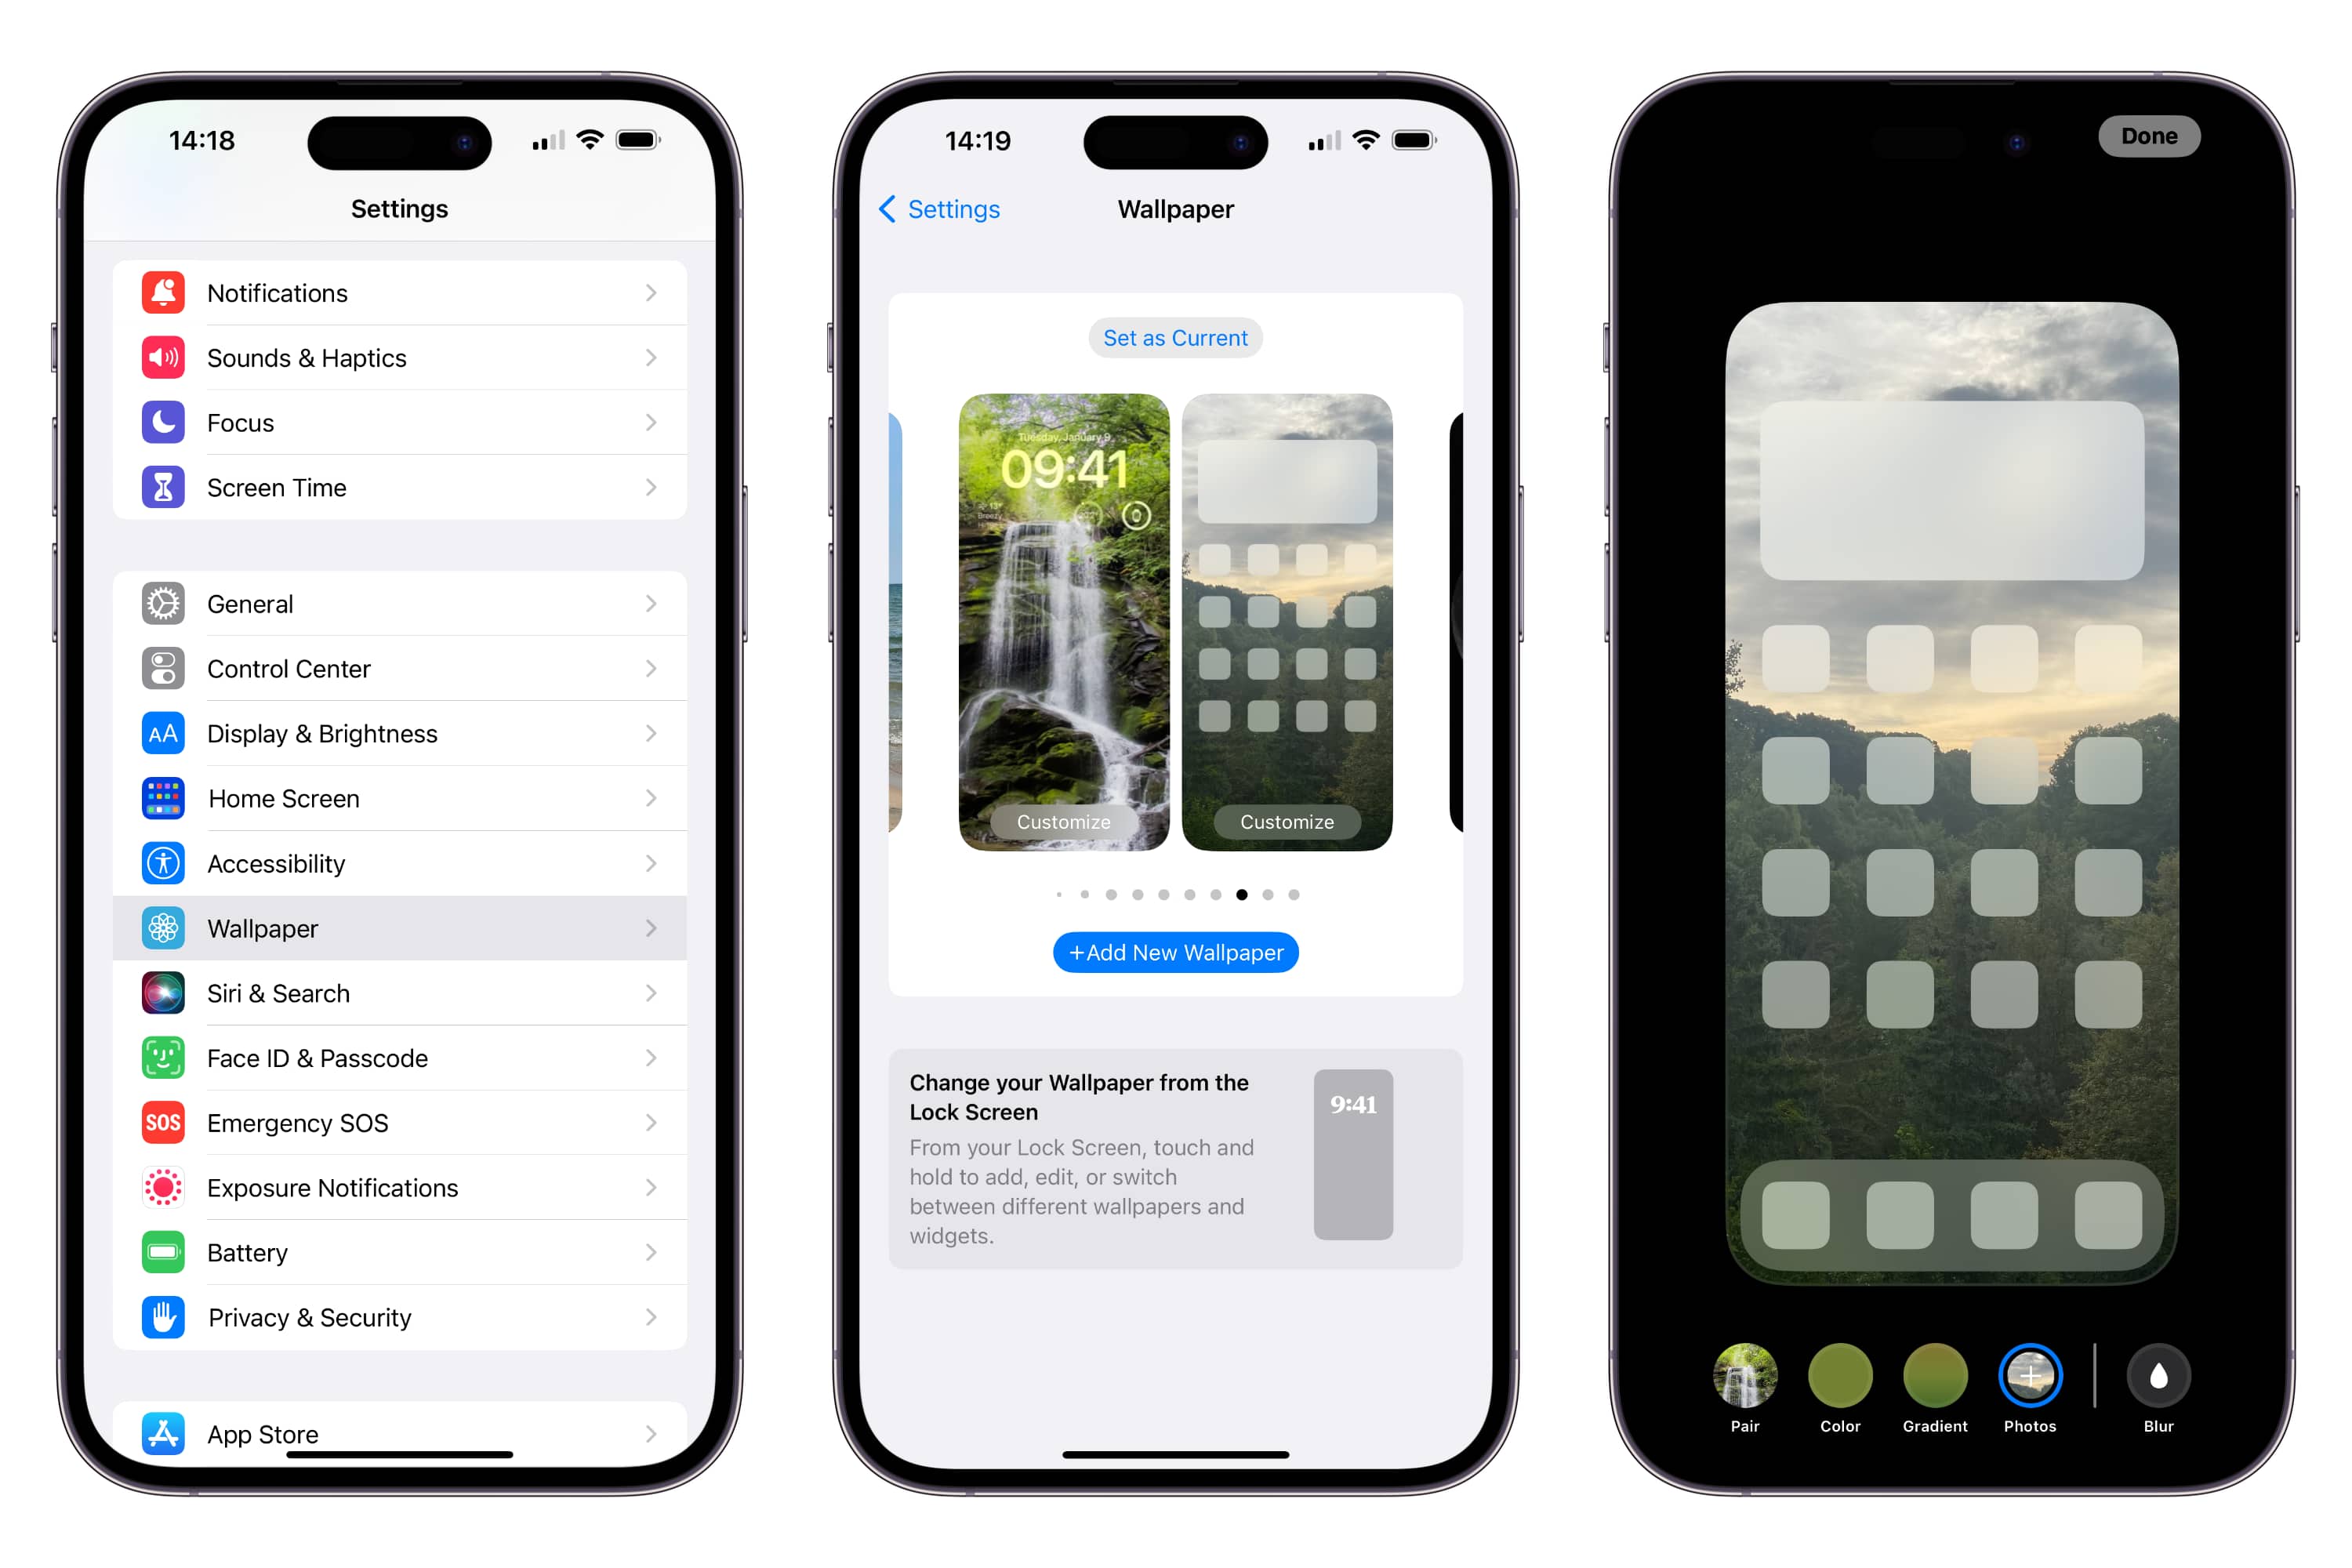 How To Set A Different Home Screen Wallpaper On Ios 16 | Digital Trends